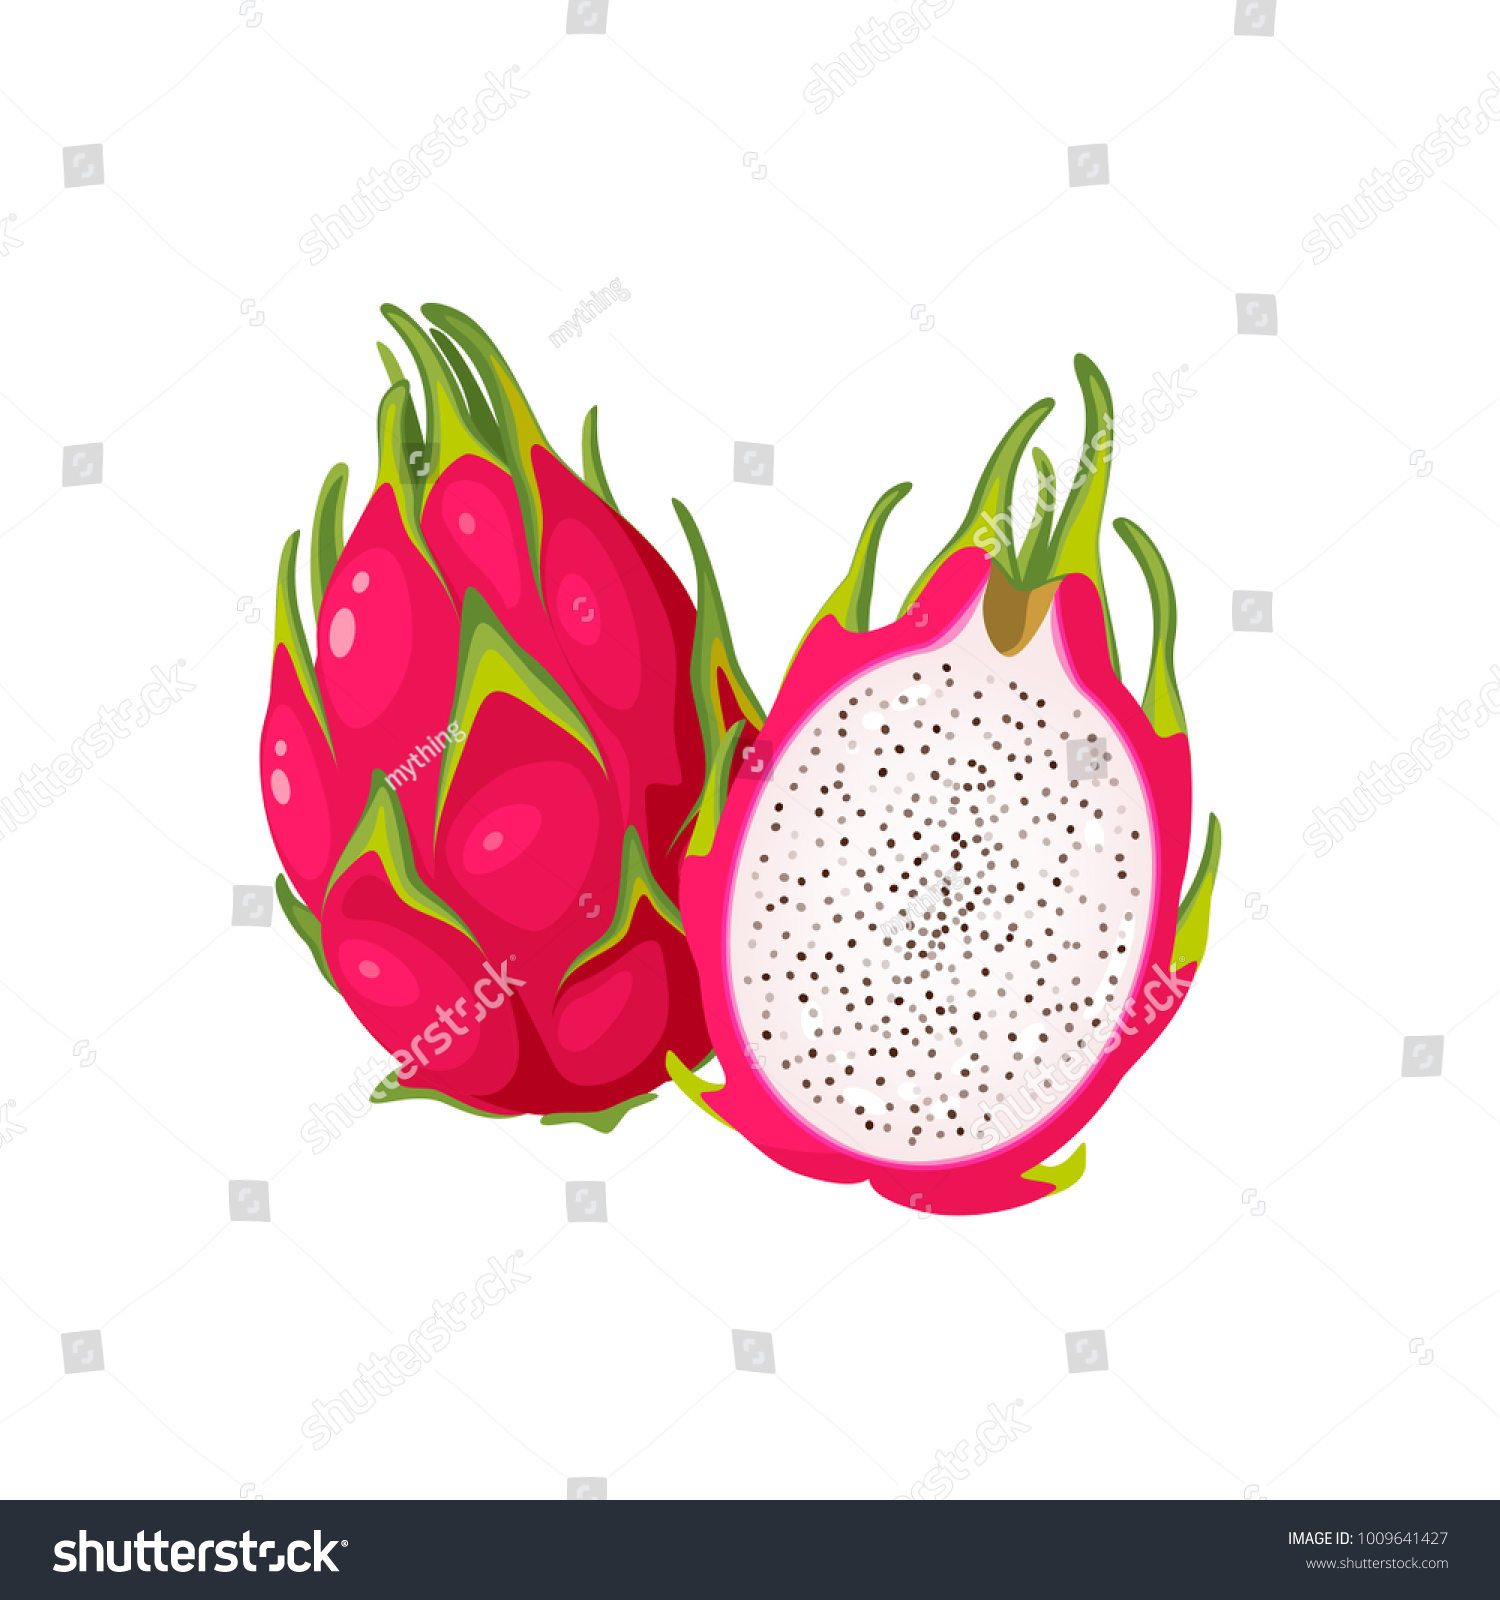 Summer tropical fruits for healthy lifestyle. Red dragon fruit, whole fruit and half. Vector illustration cartoon flat icon isolated on white. #1009641427